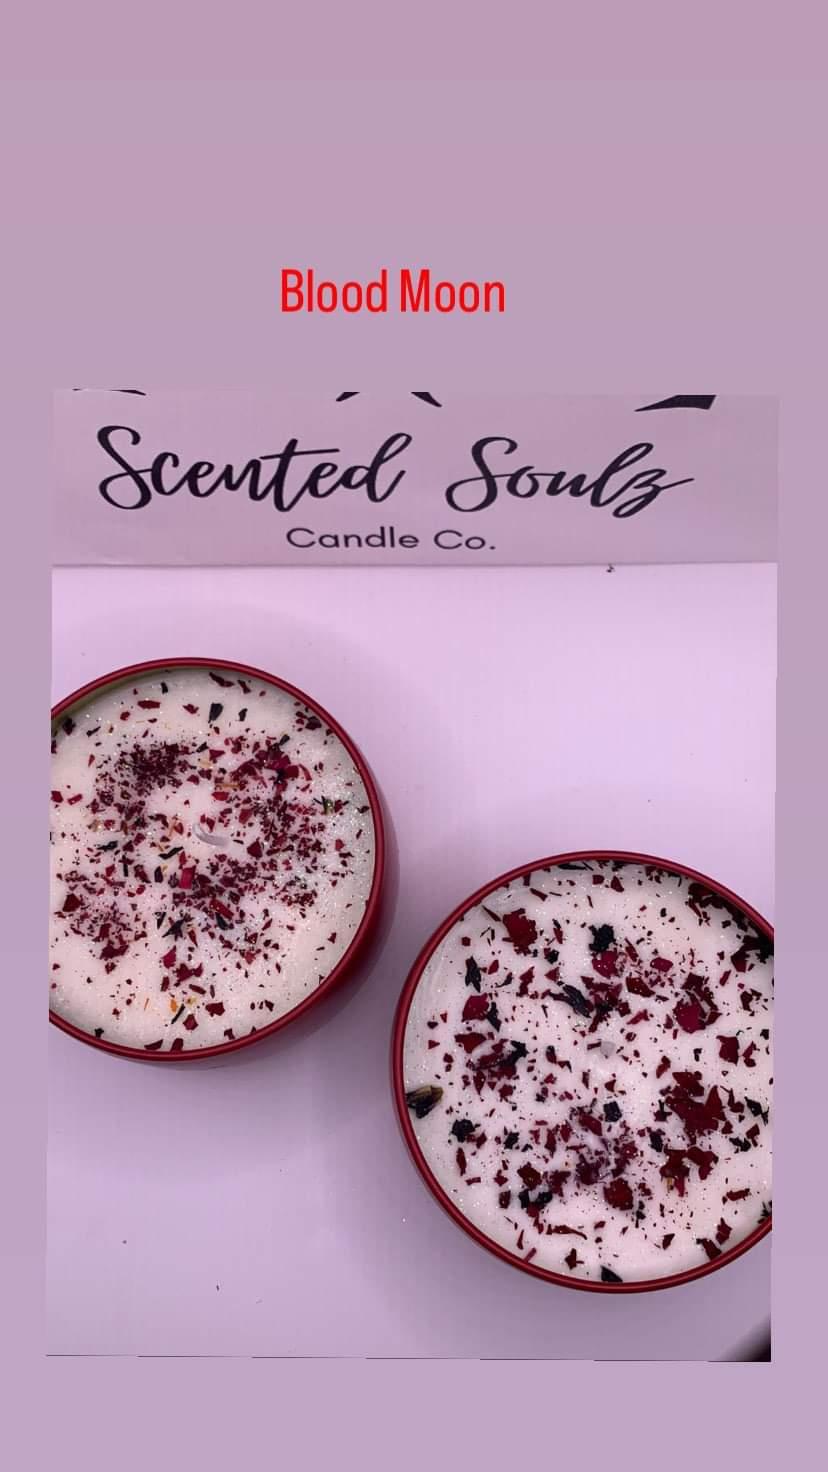 Scented Soulz Co. Contact Seller Directly for purchase.